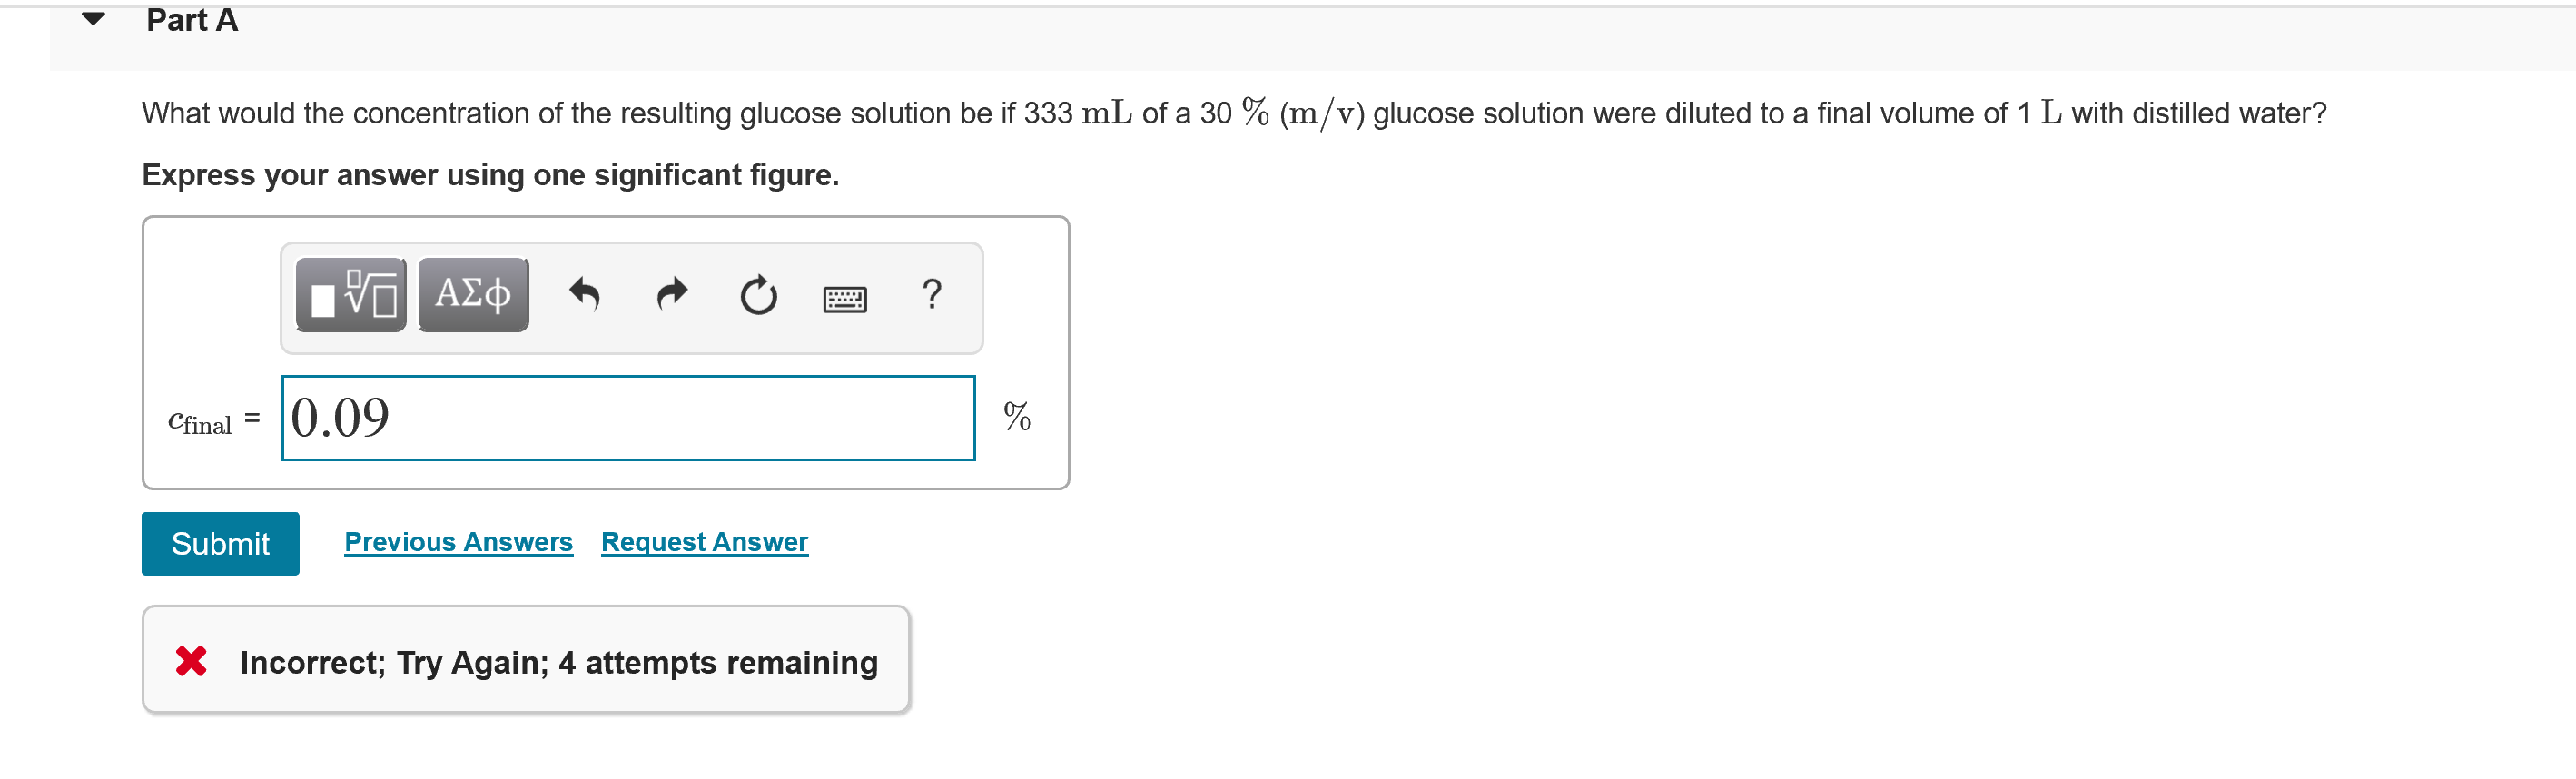 Part A
What would the concentration of the resulting glucose solution be if 333 mL of a 30 % (m/v) glucose solution were diluted to a final volume of 1 L with distilled water?
Express your answer using one significant figure.
να ΑΣφ
Cfinal = 0.09
Submit
Previous Answers Request Answer
* Incorrect; Try Again; 4 attempts remaining
